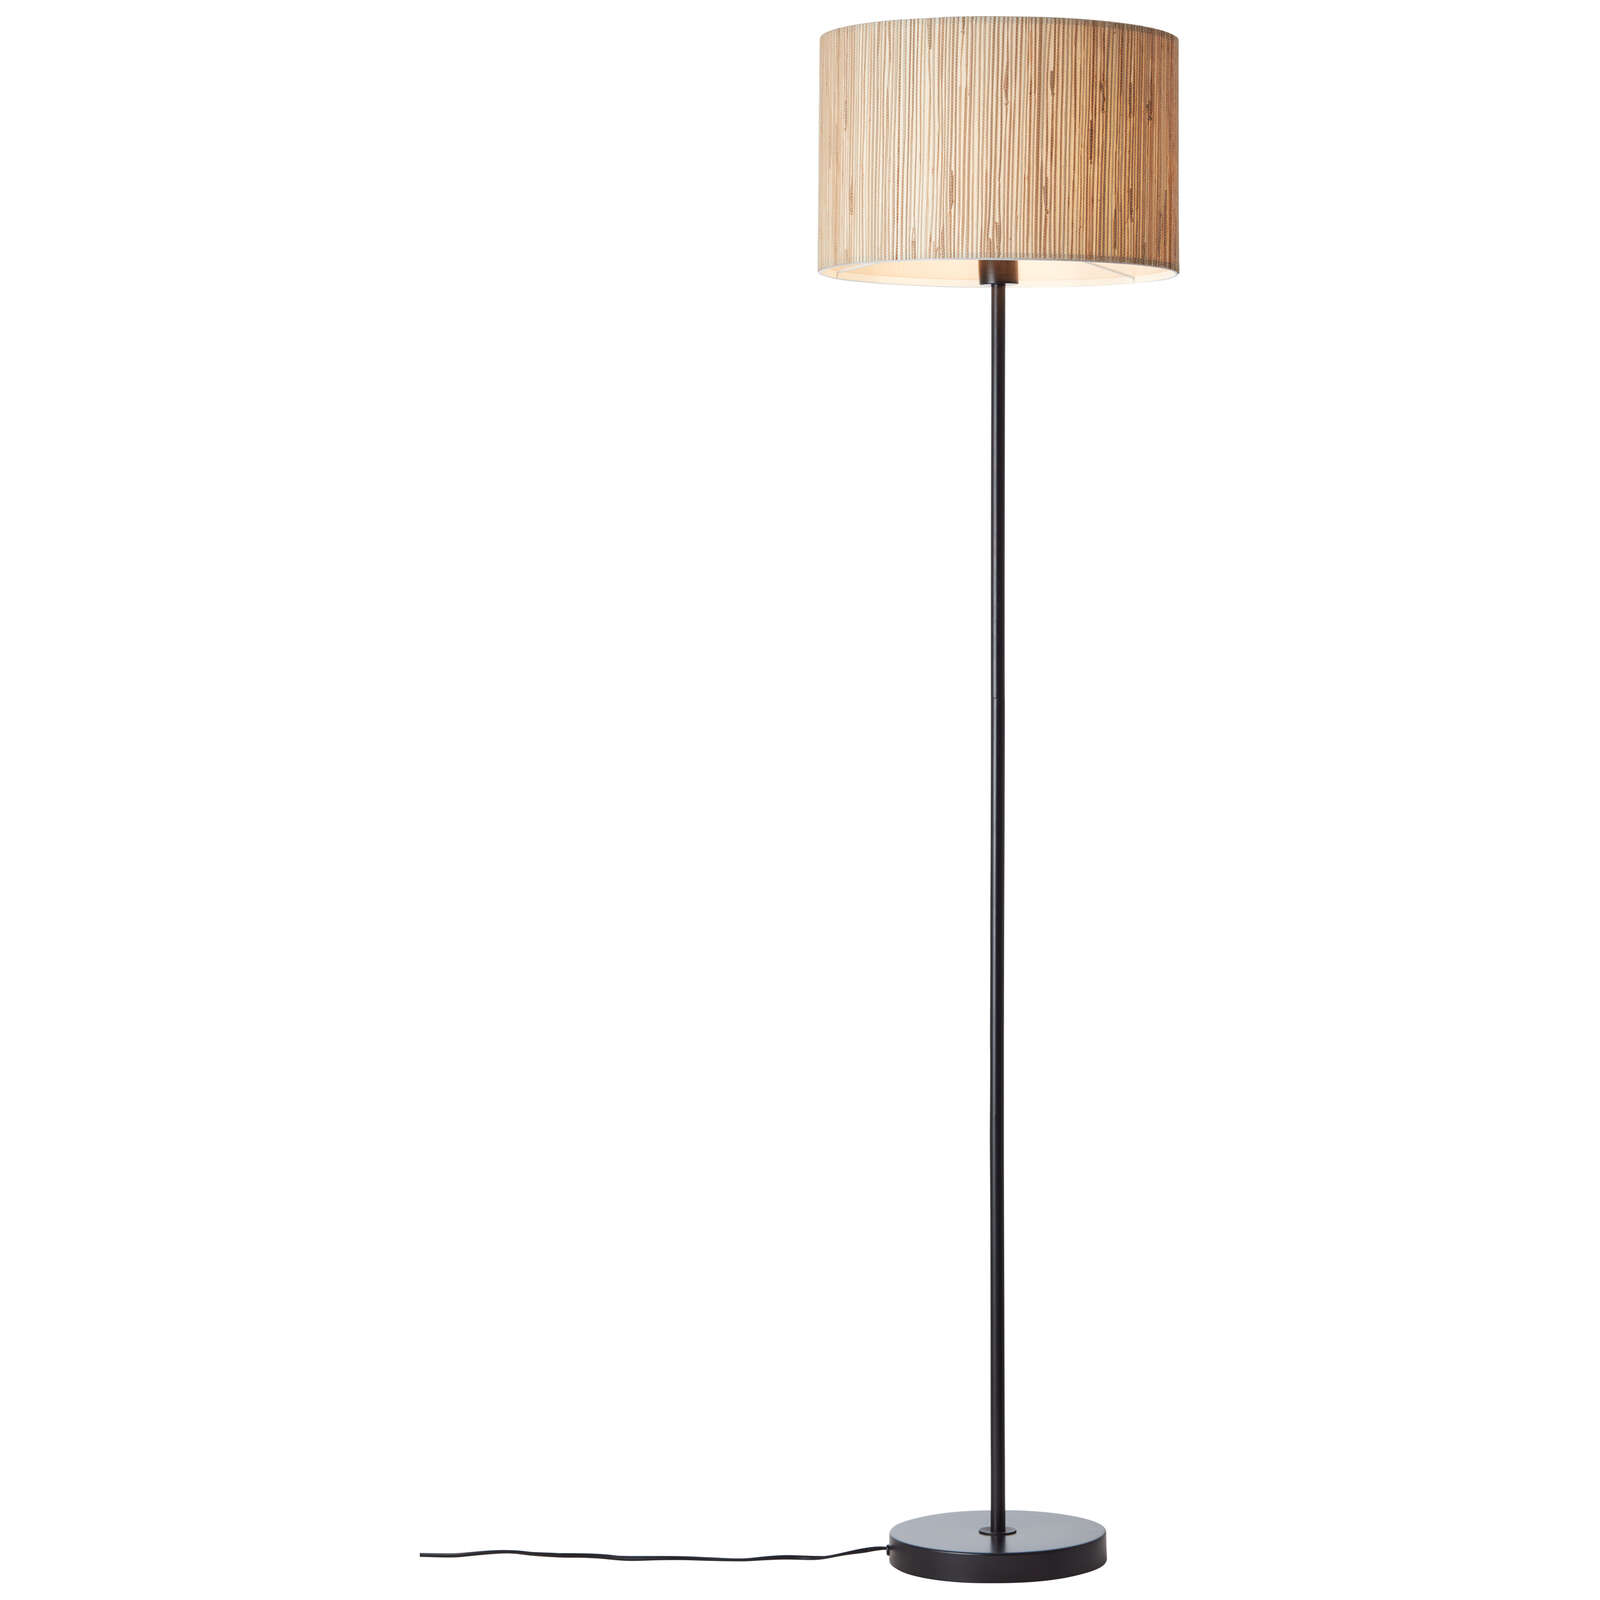             Floor lamp made of seagrass - Valentin 3 - Brown
        